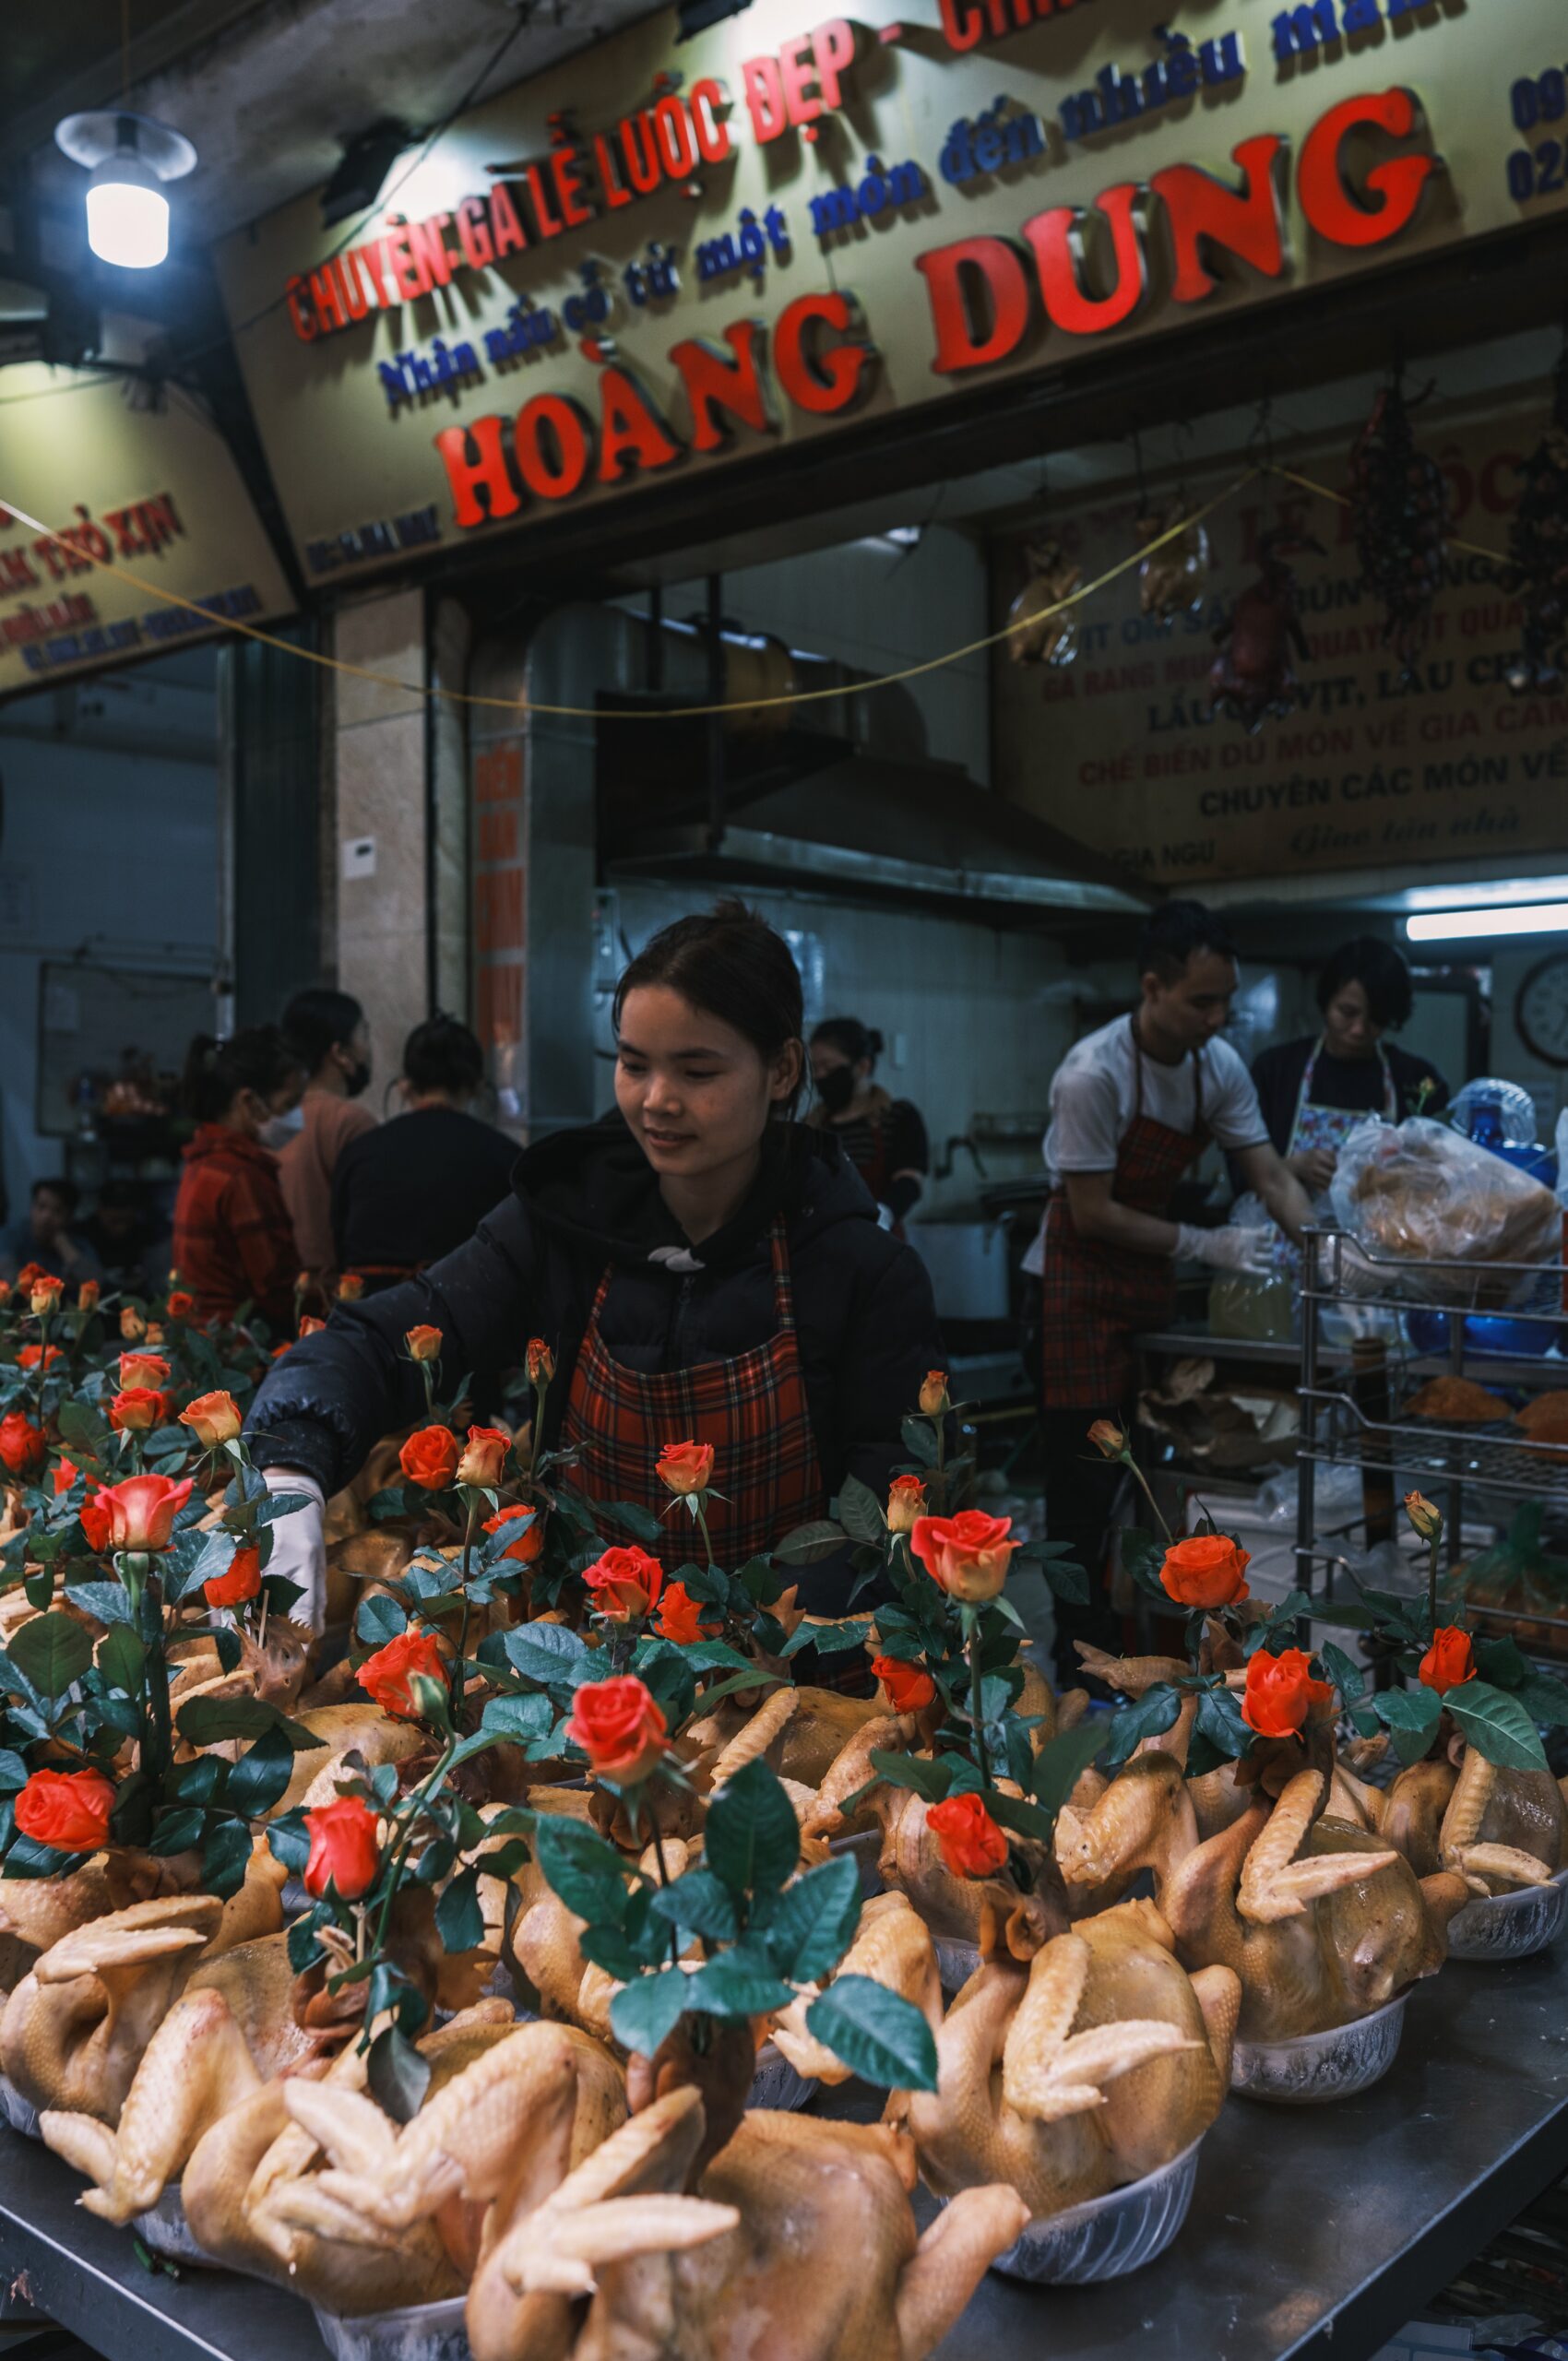 Boiled Chicken with Rose Branches, Hang Be Street Market, Hanoi, Vietnam